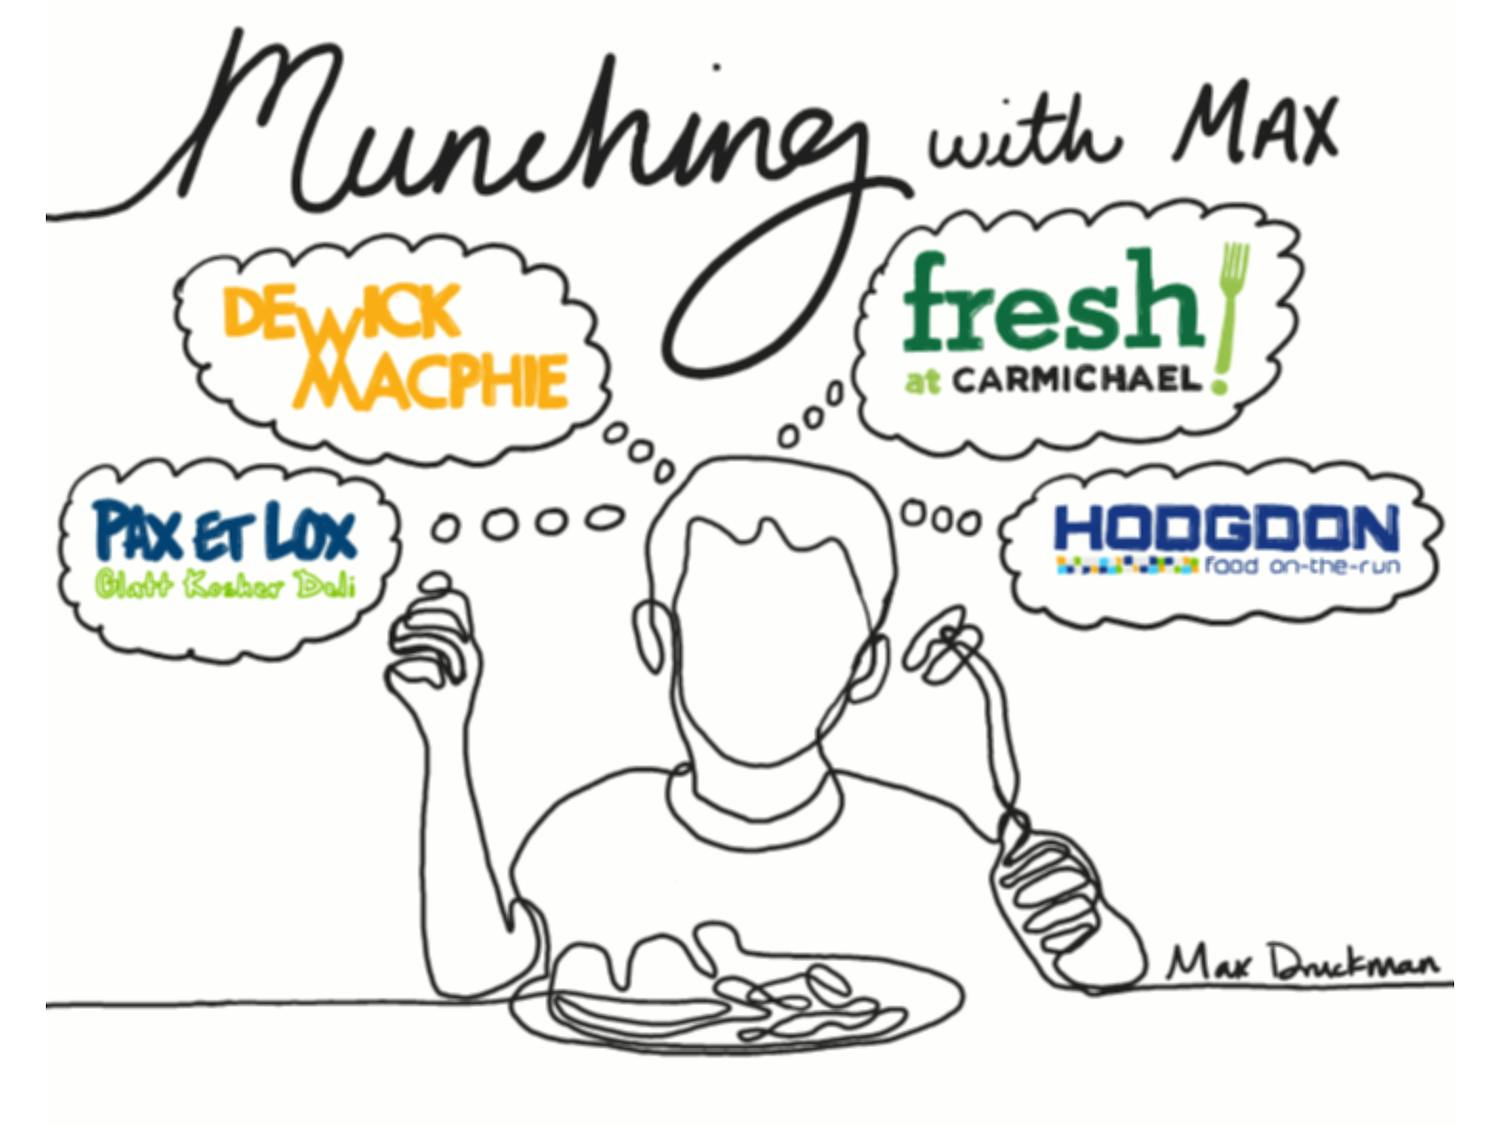 column graphic for Max Druckman's "Munching with Max" column